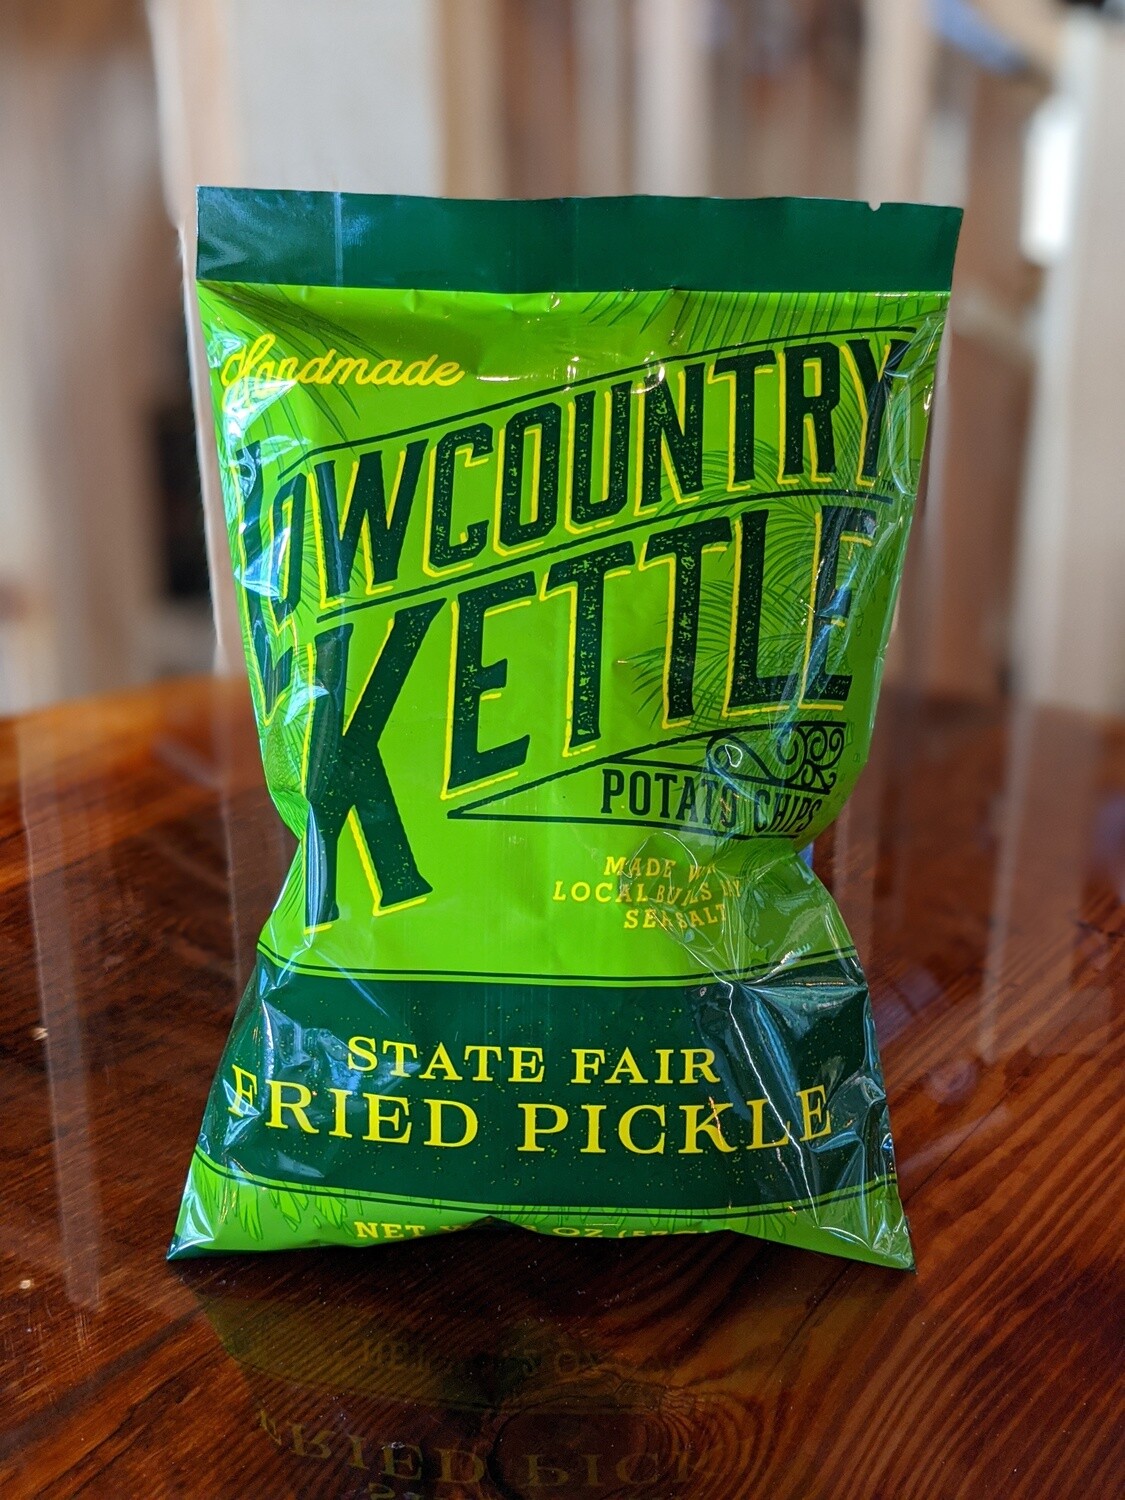 Lowcountry Kettle Chips State Fair Fried Pickle